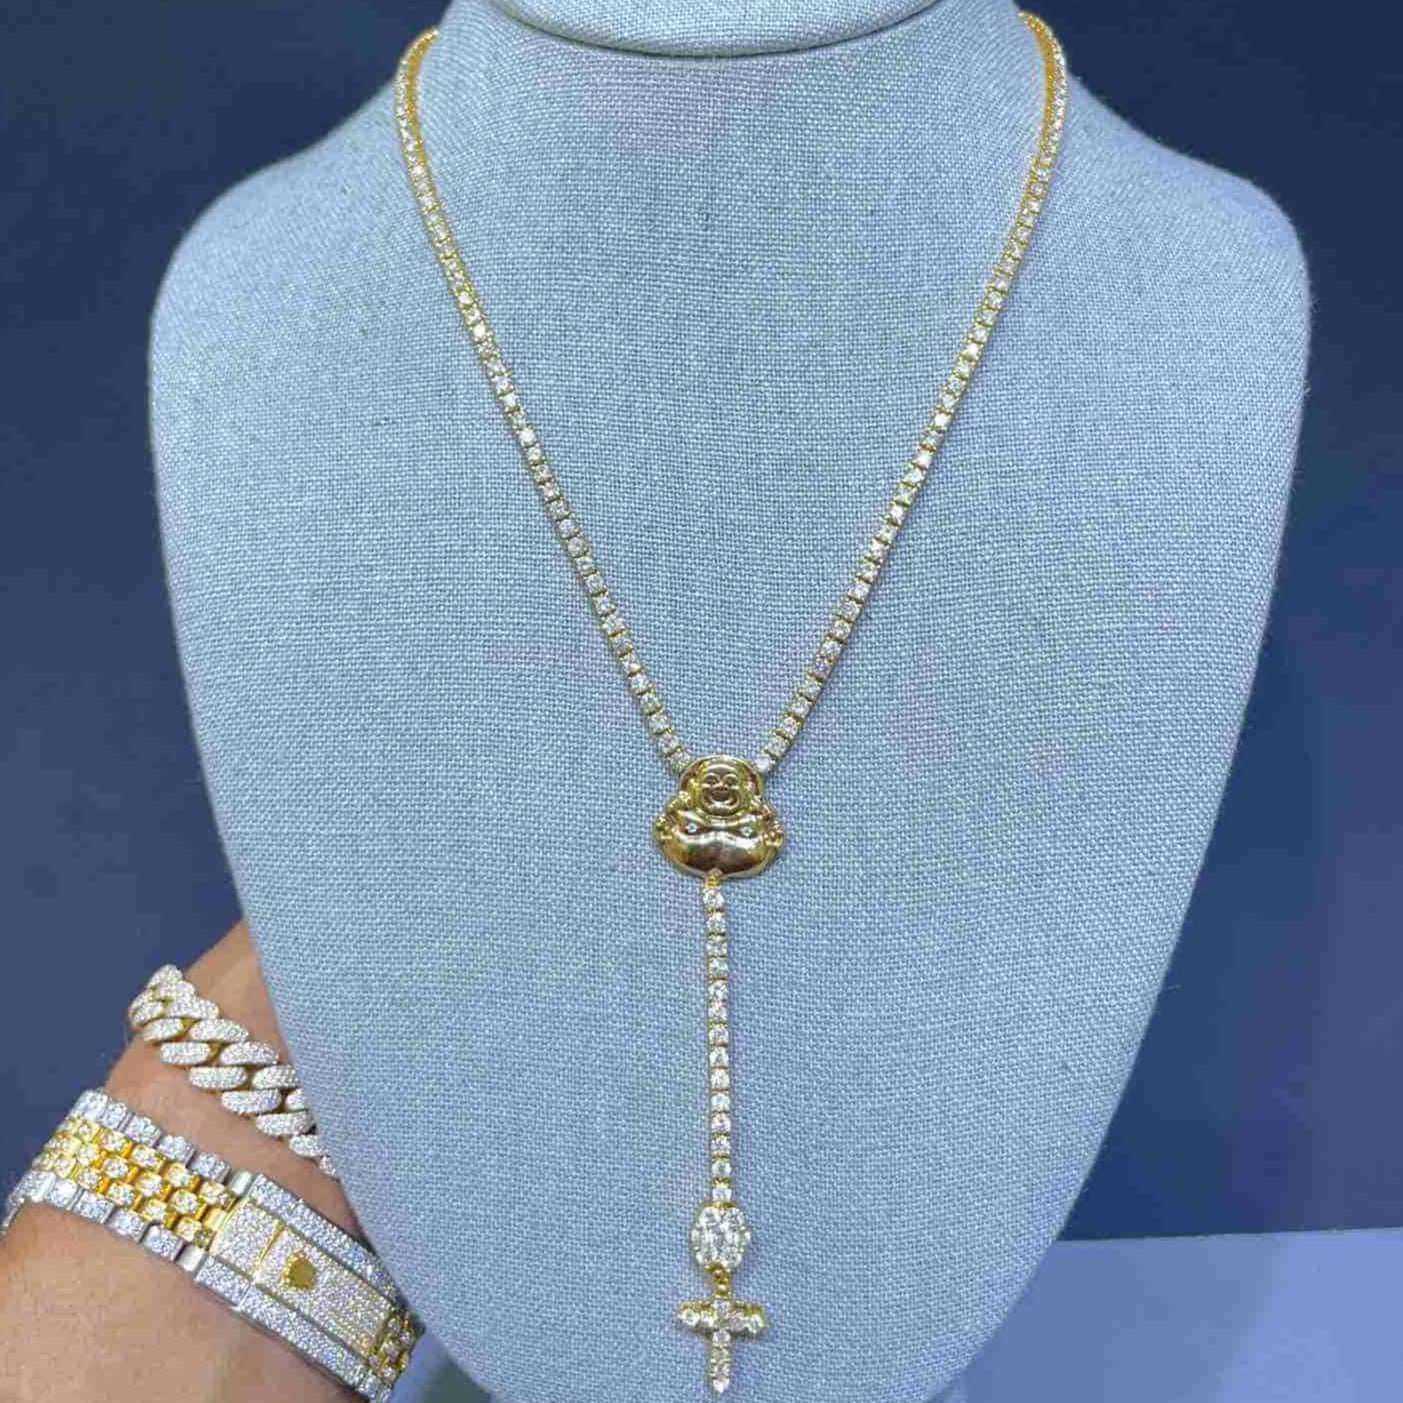 Iced Out Cross Chain